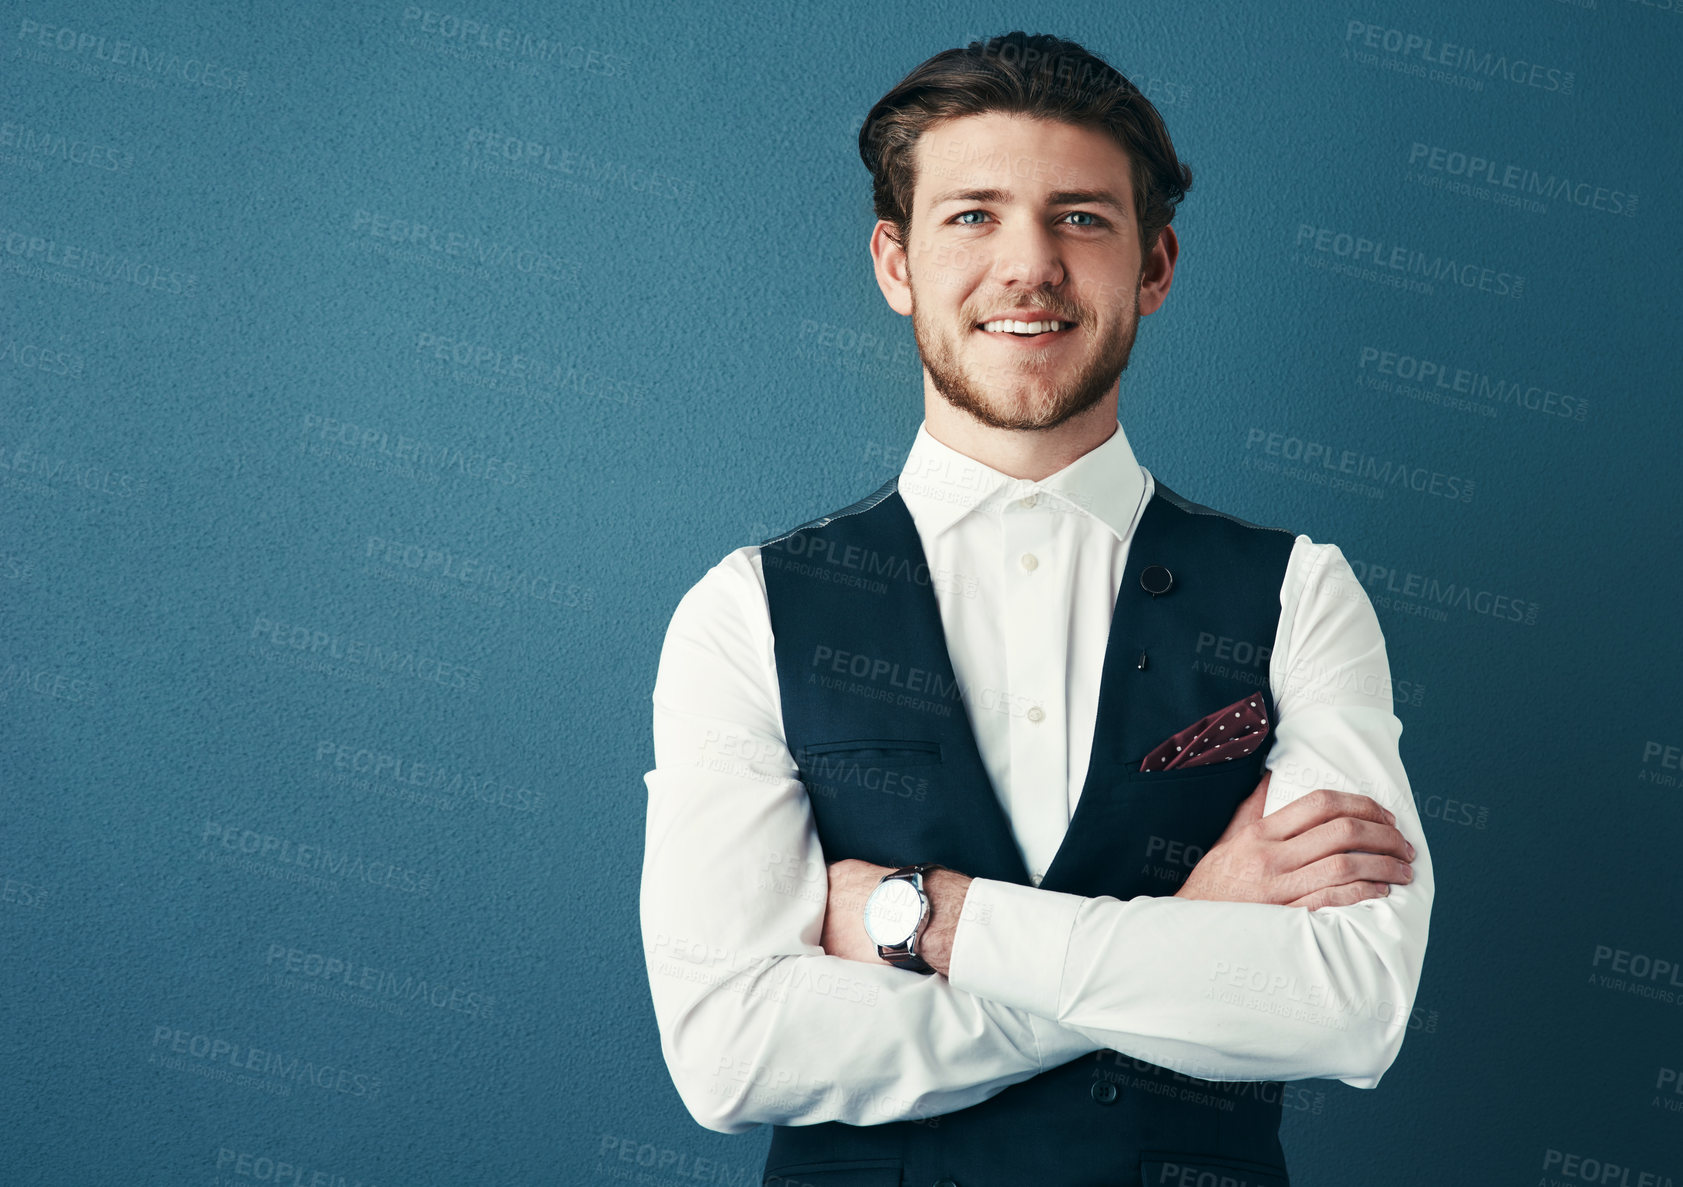 Buy stock photo Studio shot of a handsome young businessman standing with his arms crossed against a blue background